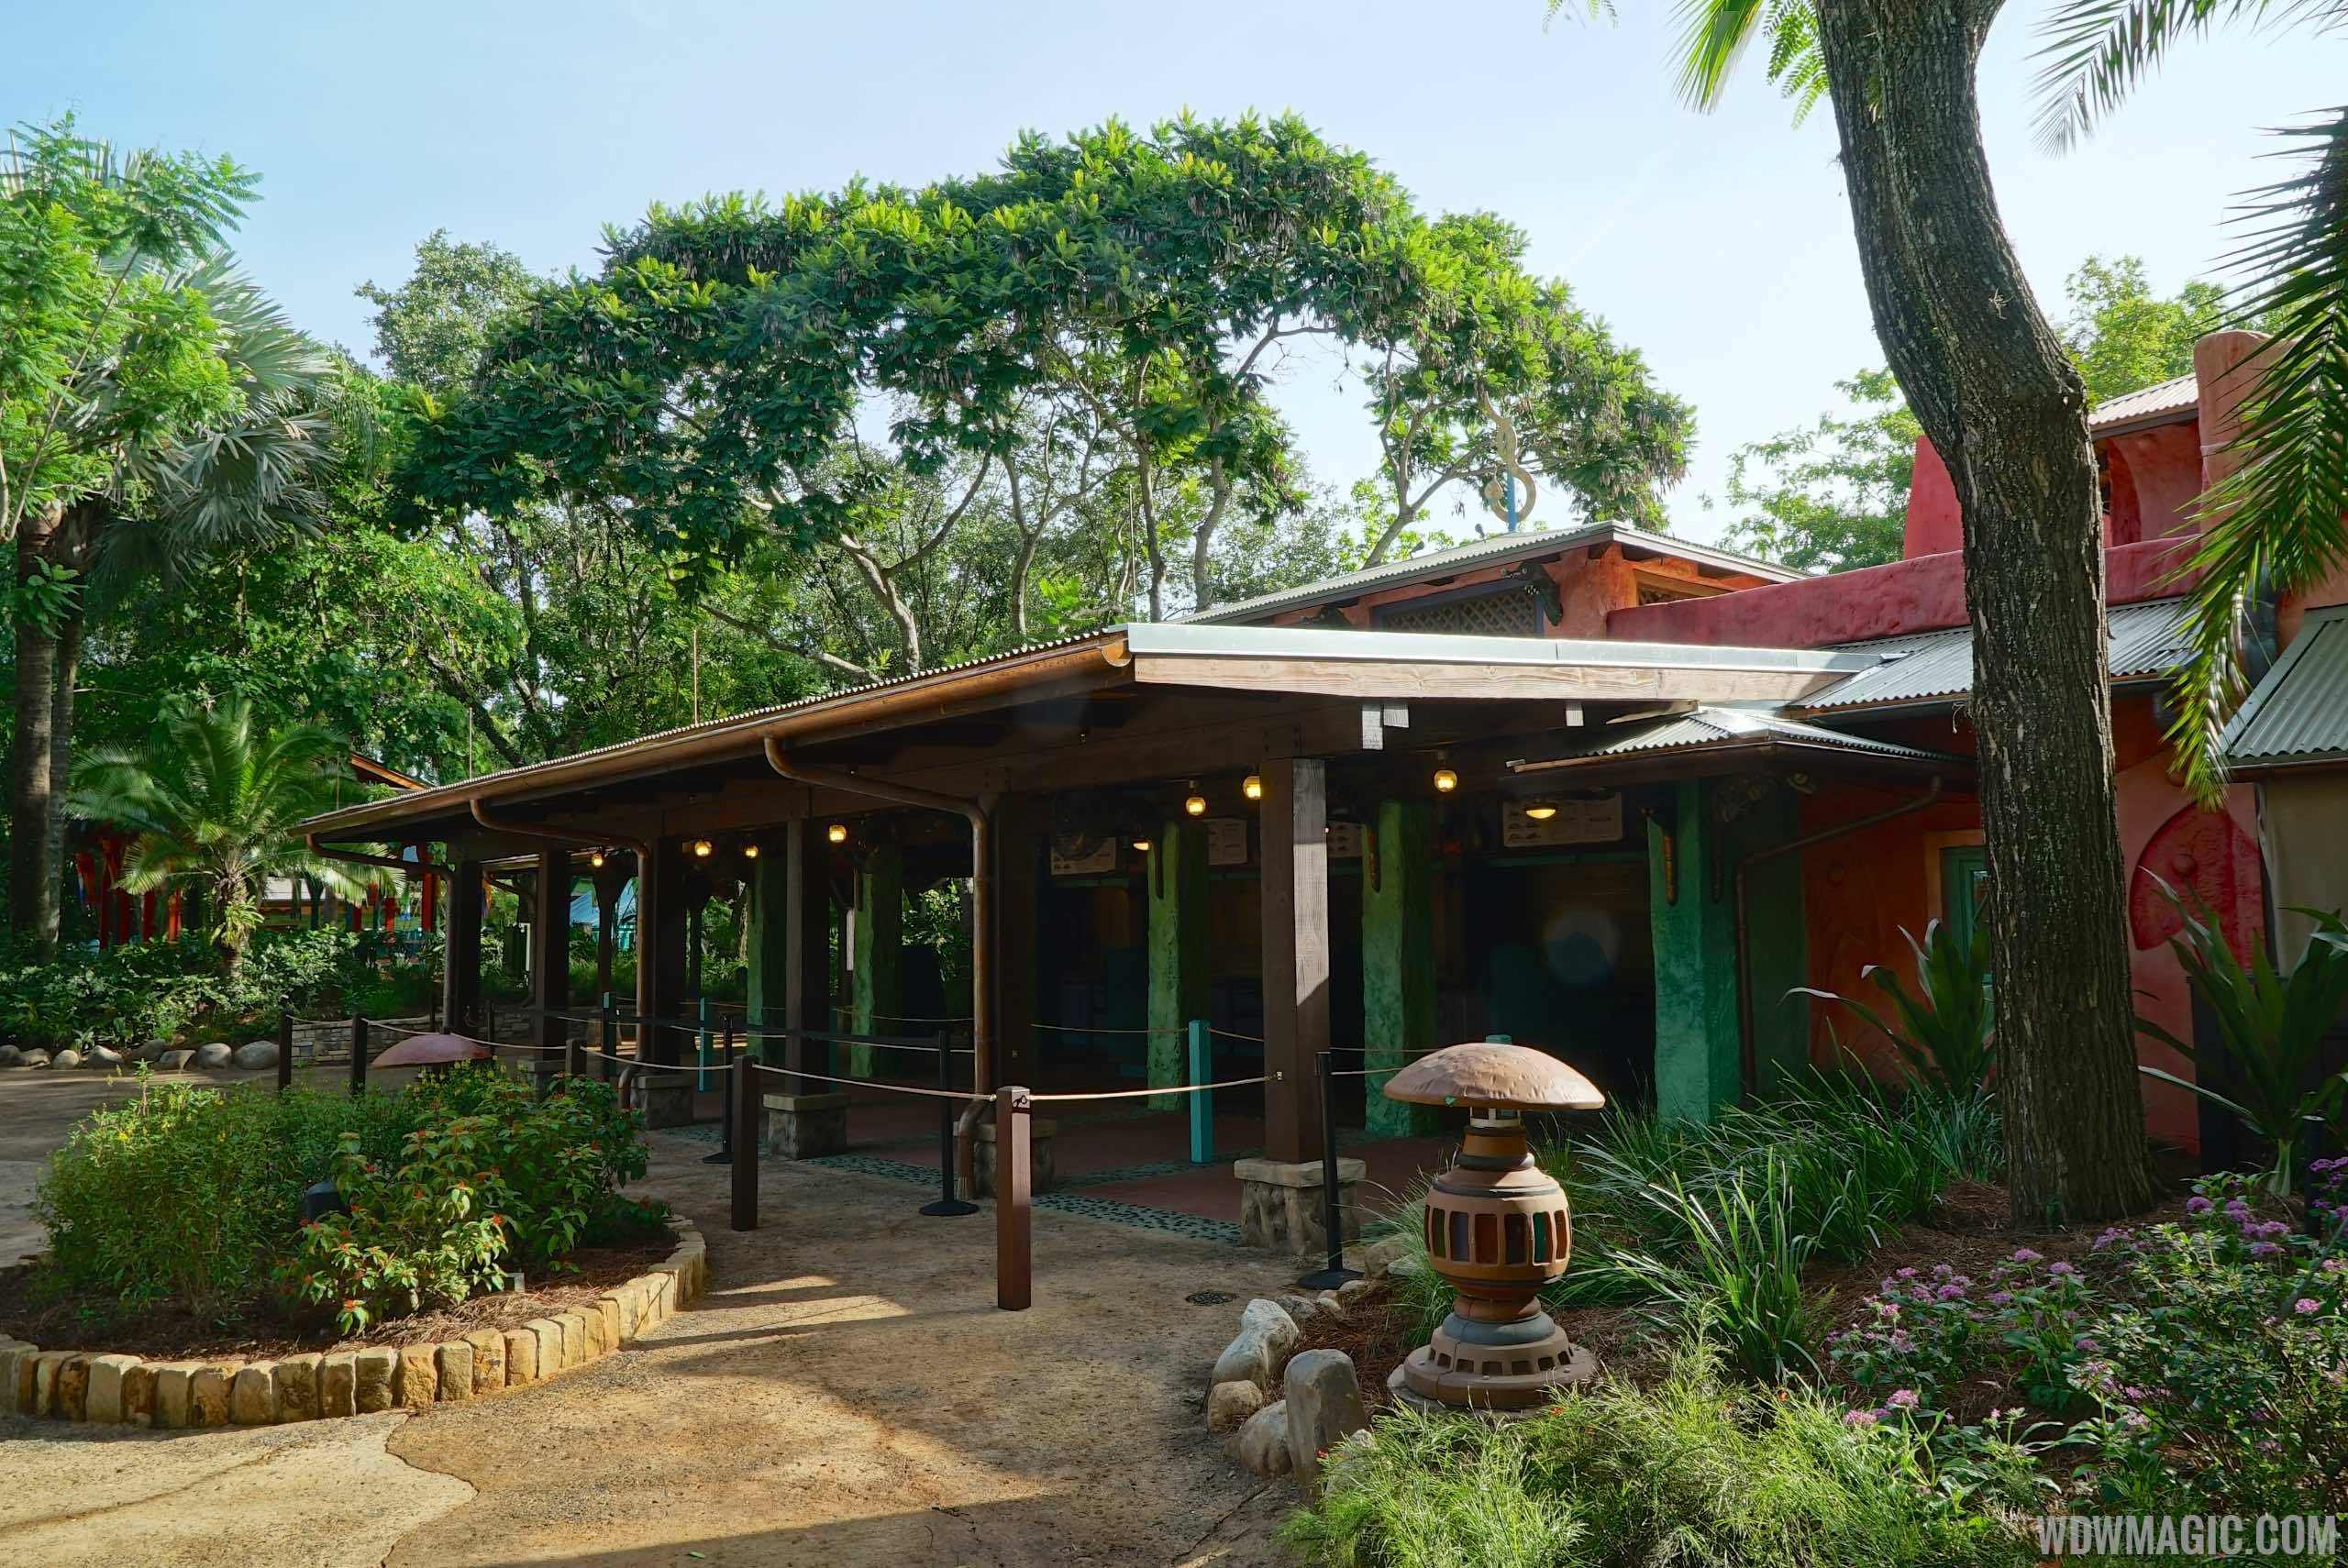 Flame Tree Barbecue will be the next restaurant to offer Mobile Order